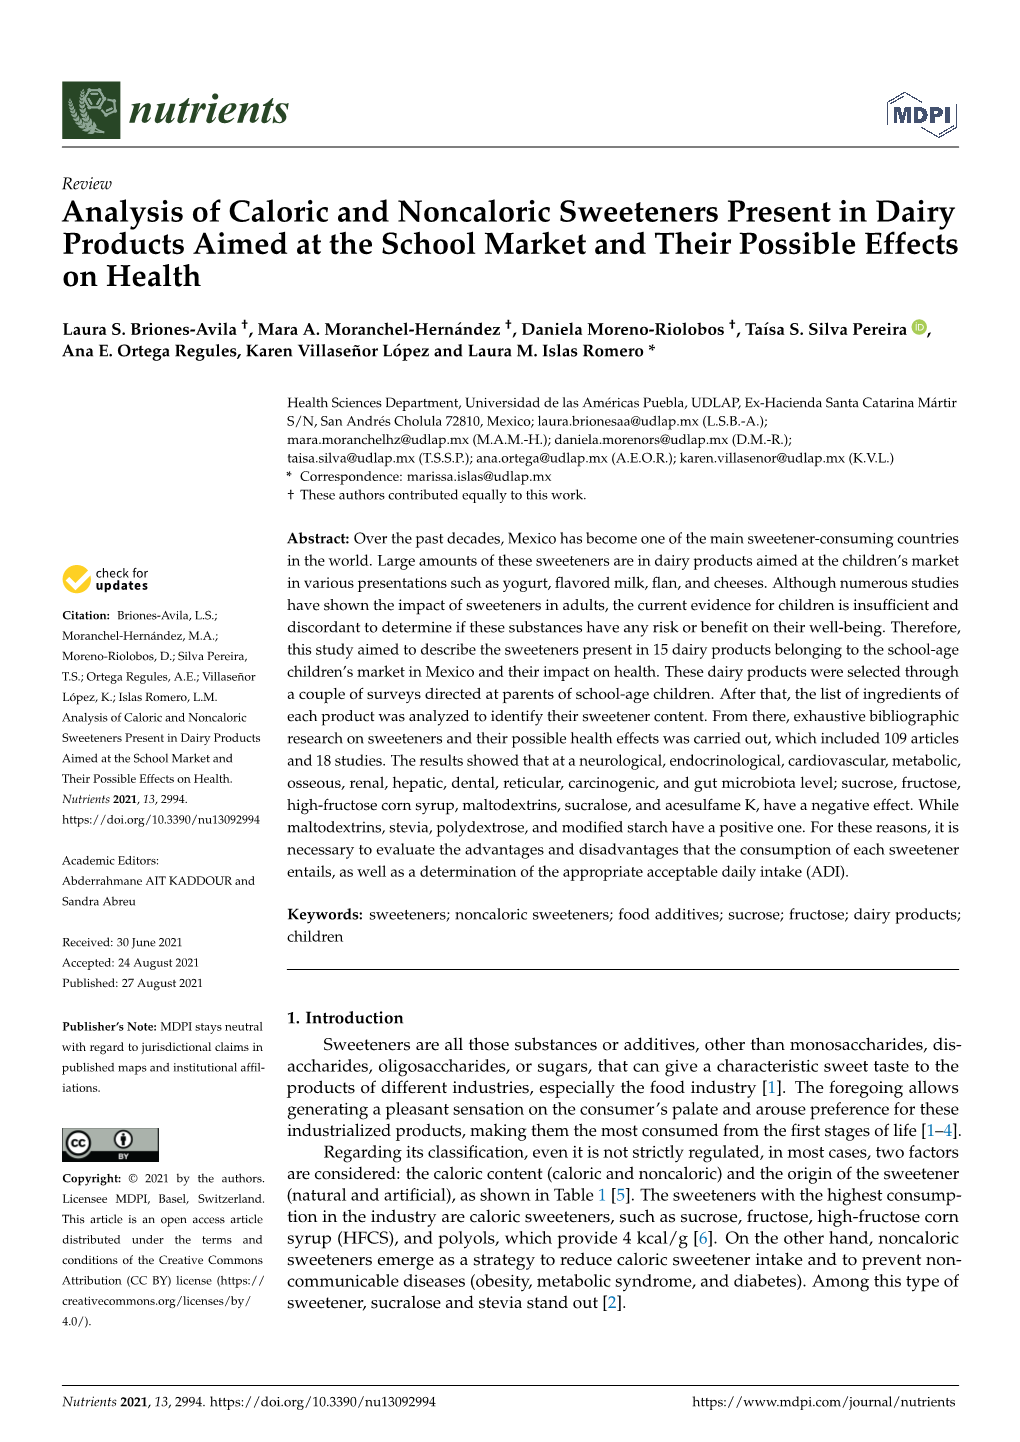 Analysis of Caloric and Noncaloric Sweeteners Present in Dairy Products Aimed at the School Market and Their Possible Effects on Health